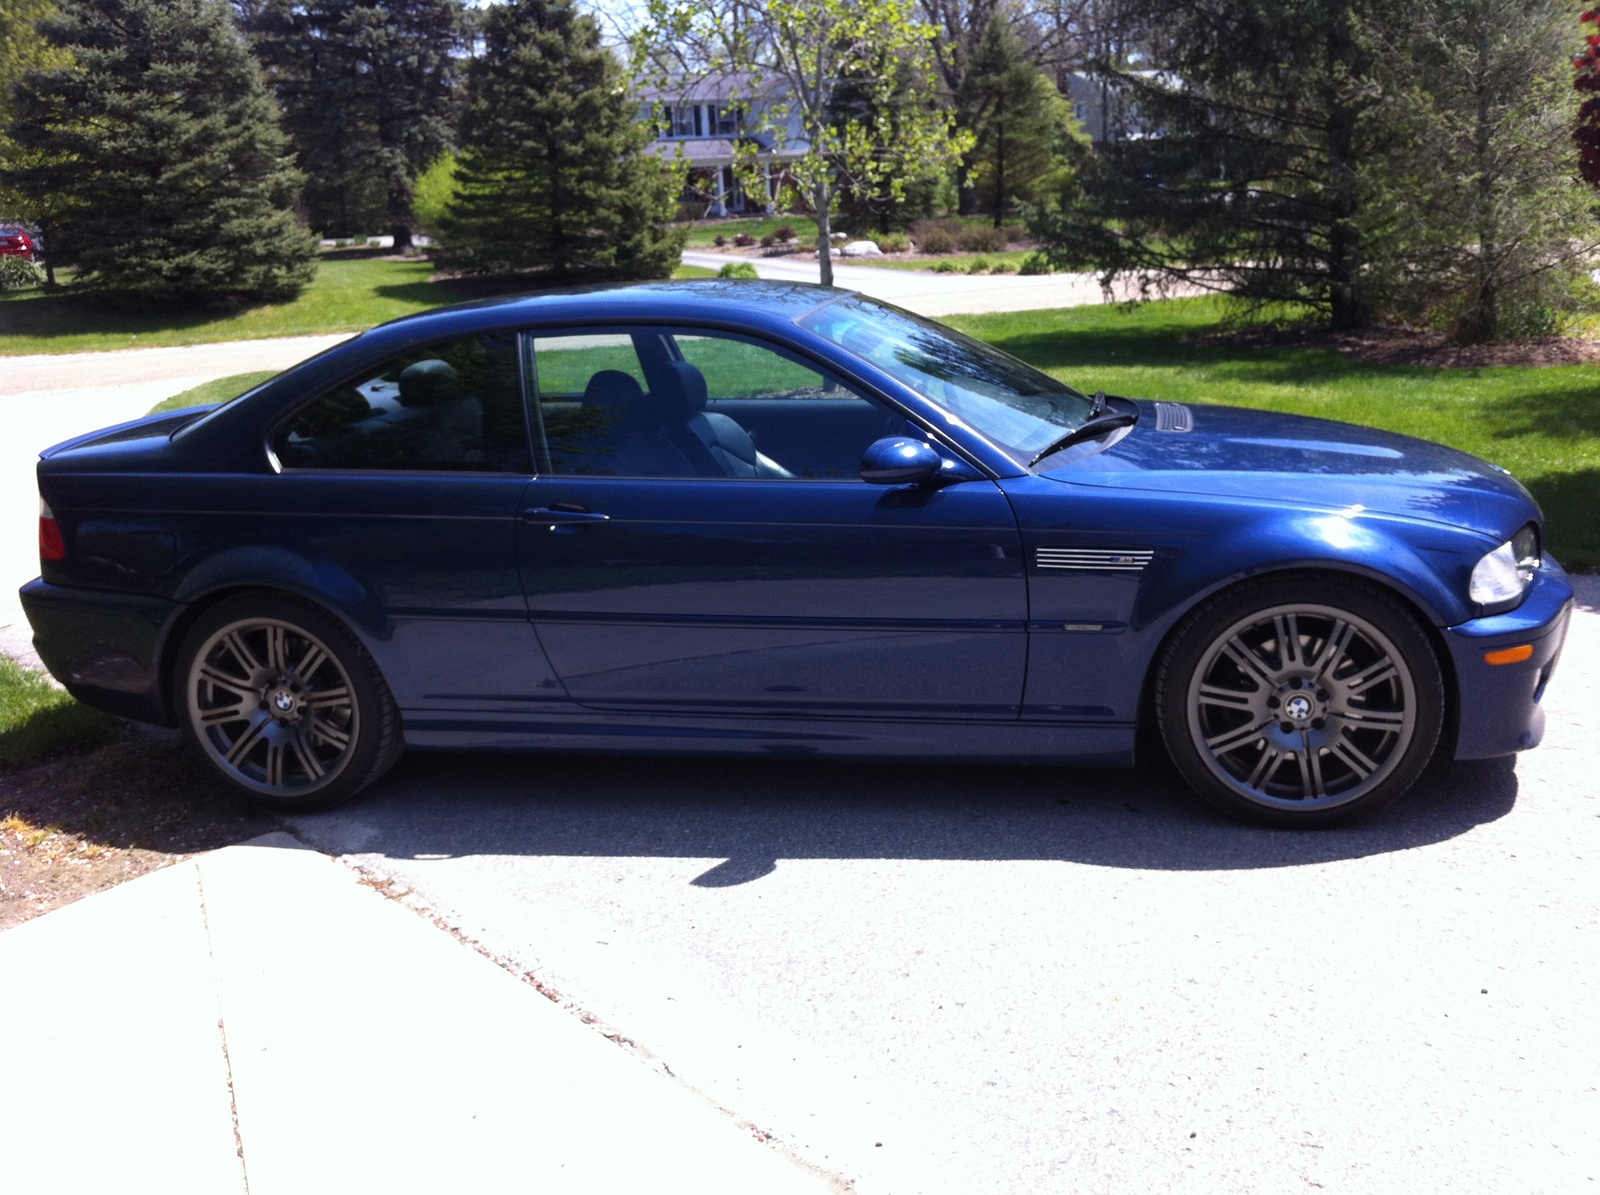 2004 Bmw m3 coupe review #1